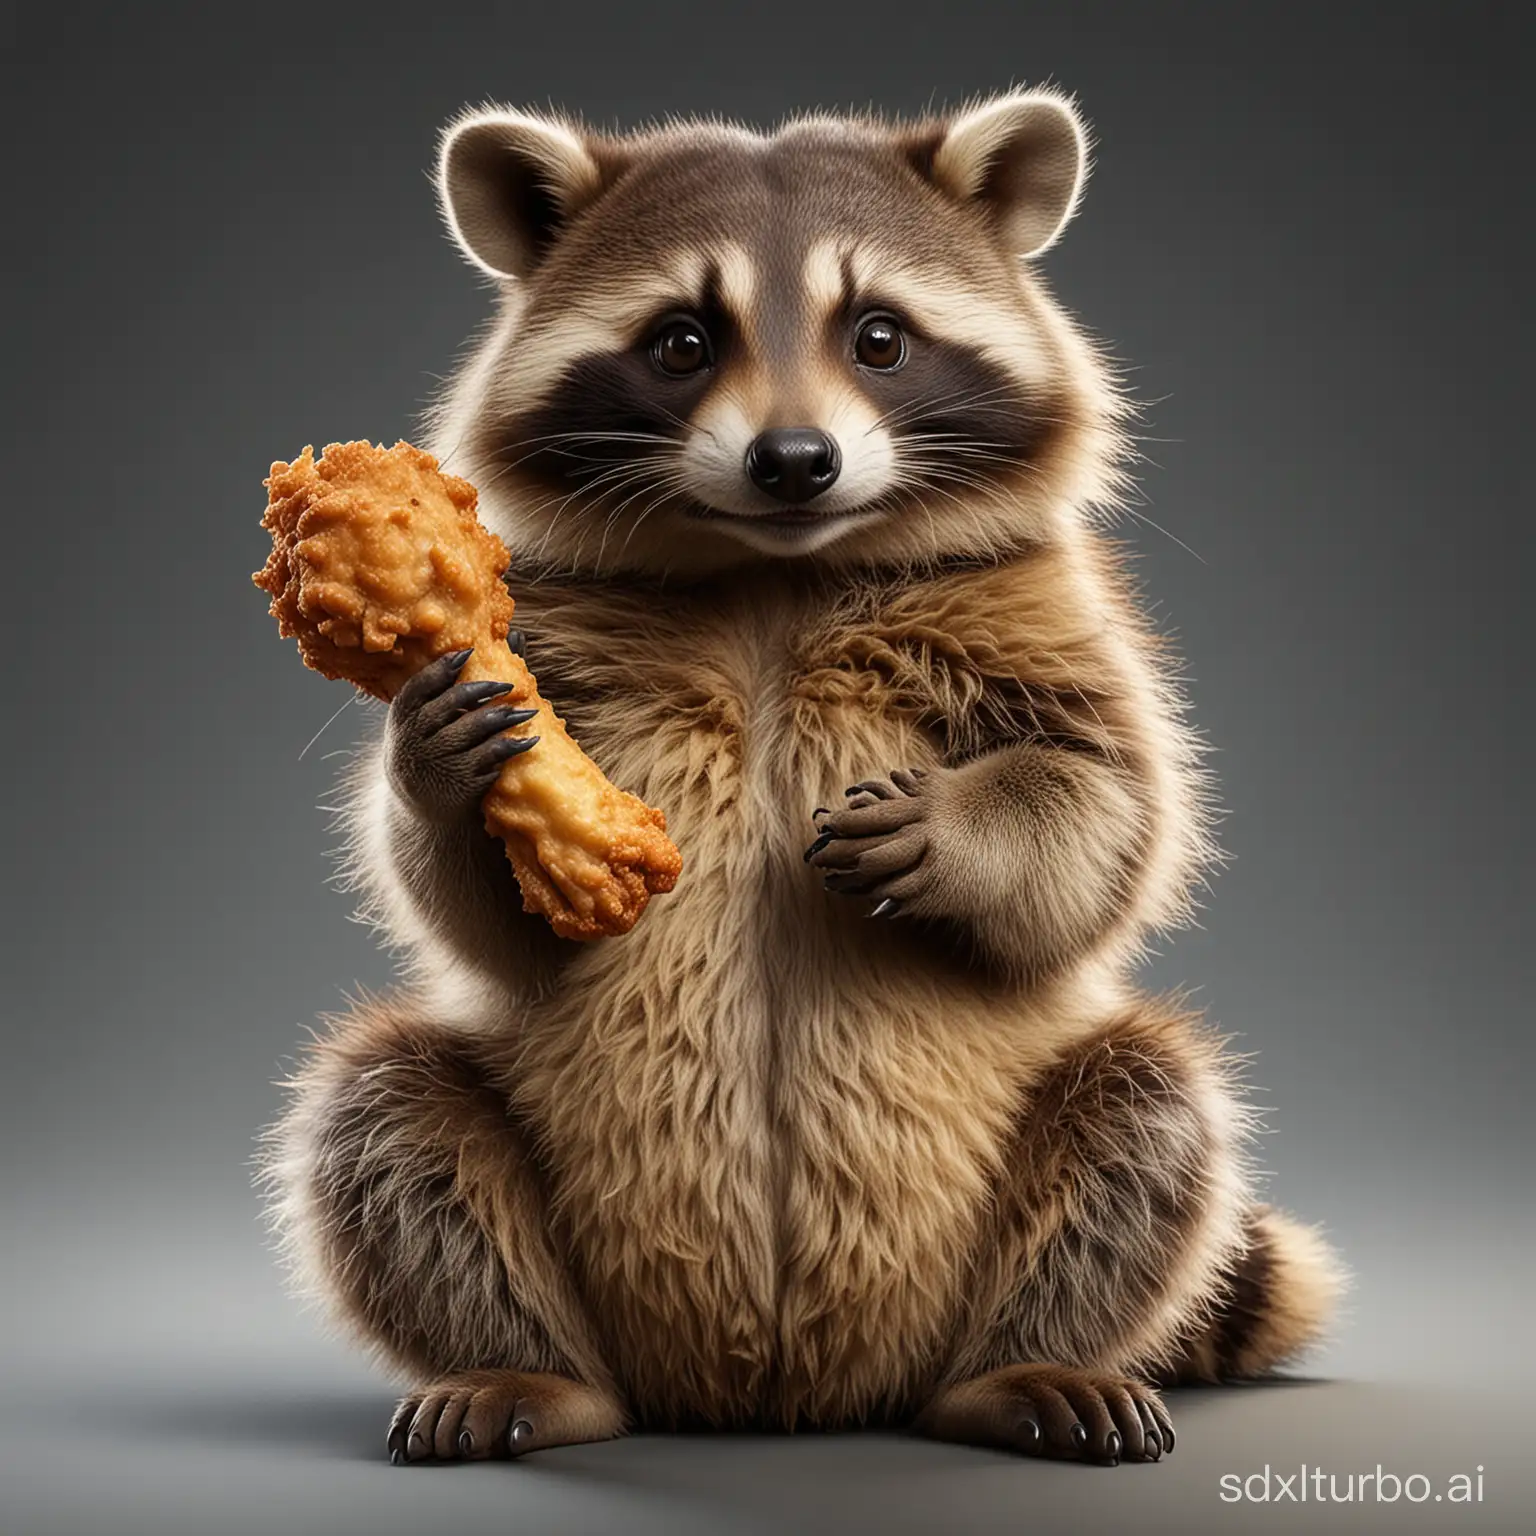 Adorable-Chubby-Raccoon-Holding-Delicious-Fried-Chicken-Drumstick